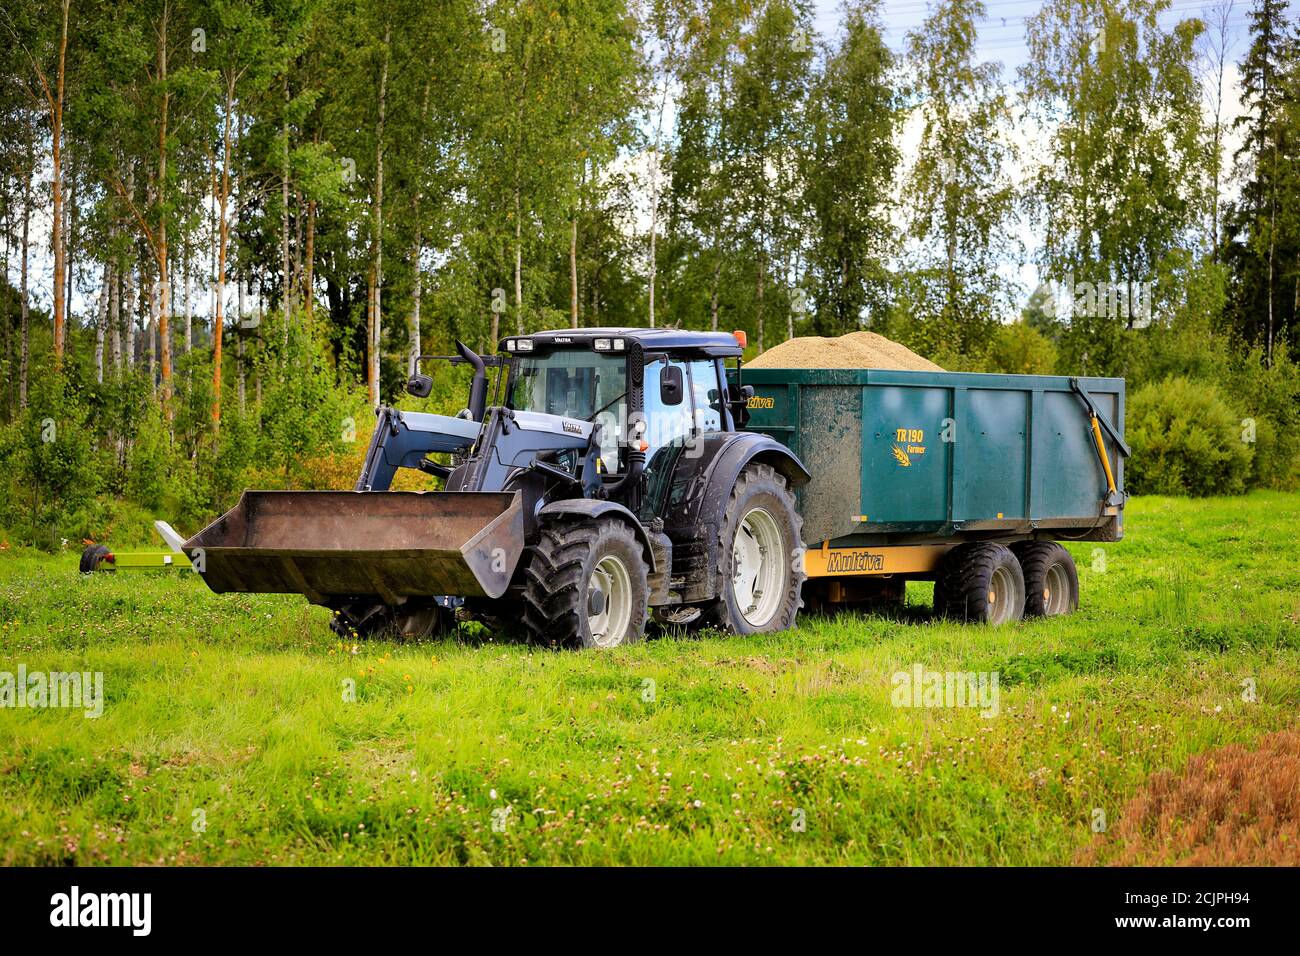 Silver Valtra farm tractor with Multiva trailer load of harvested grain by field on a clear day of autumn harvest. Koski Tl, Finland. September 11, 20 Stock Photo